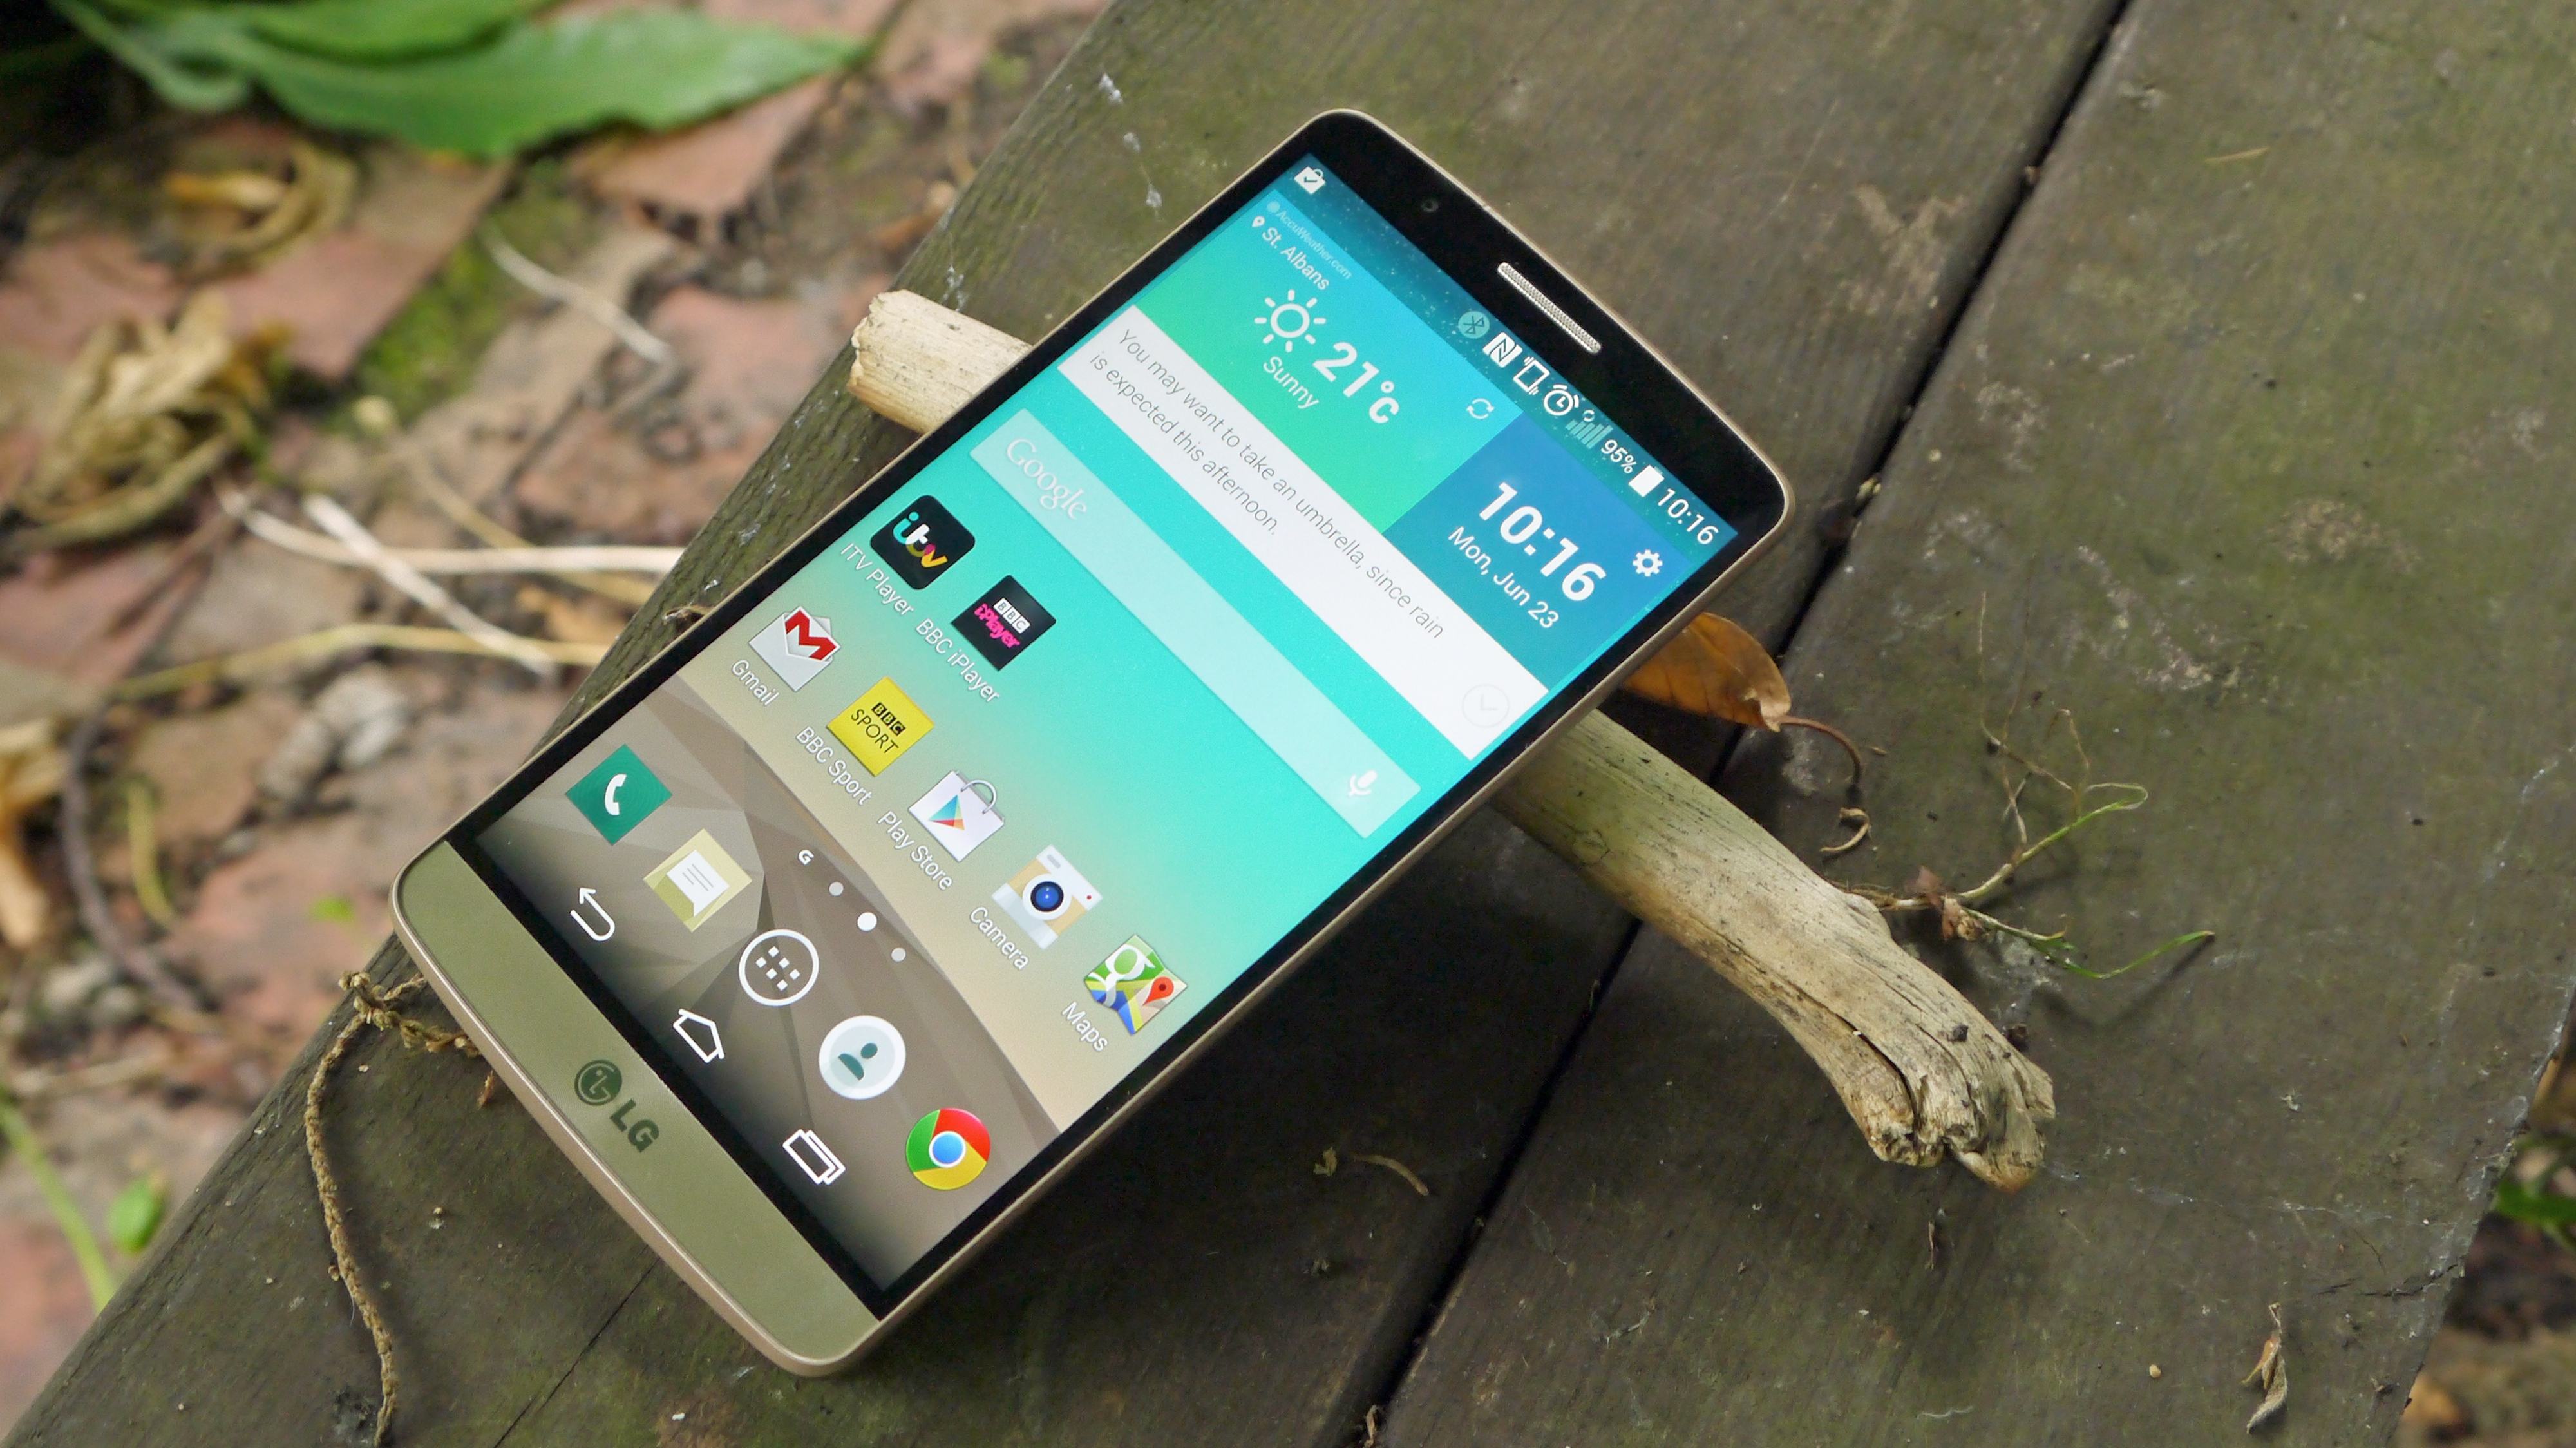 LG G3 Beat detailed review